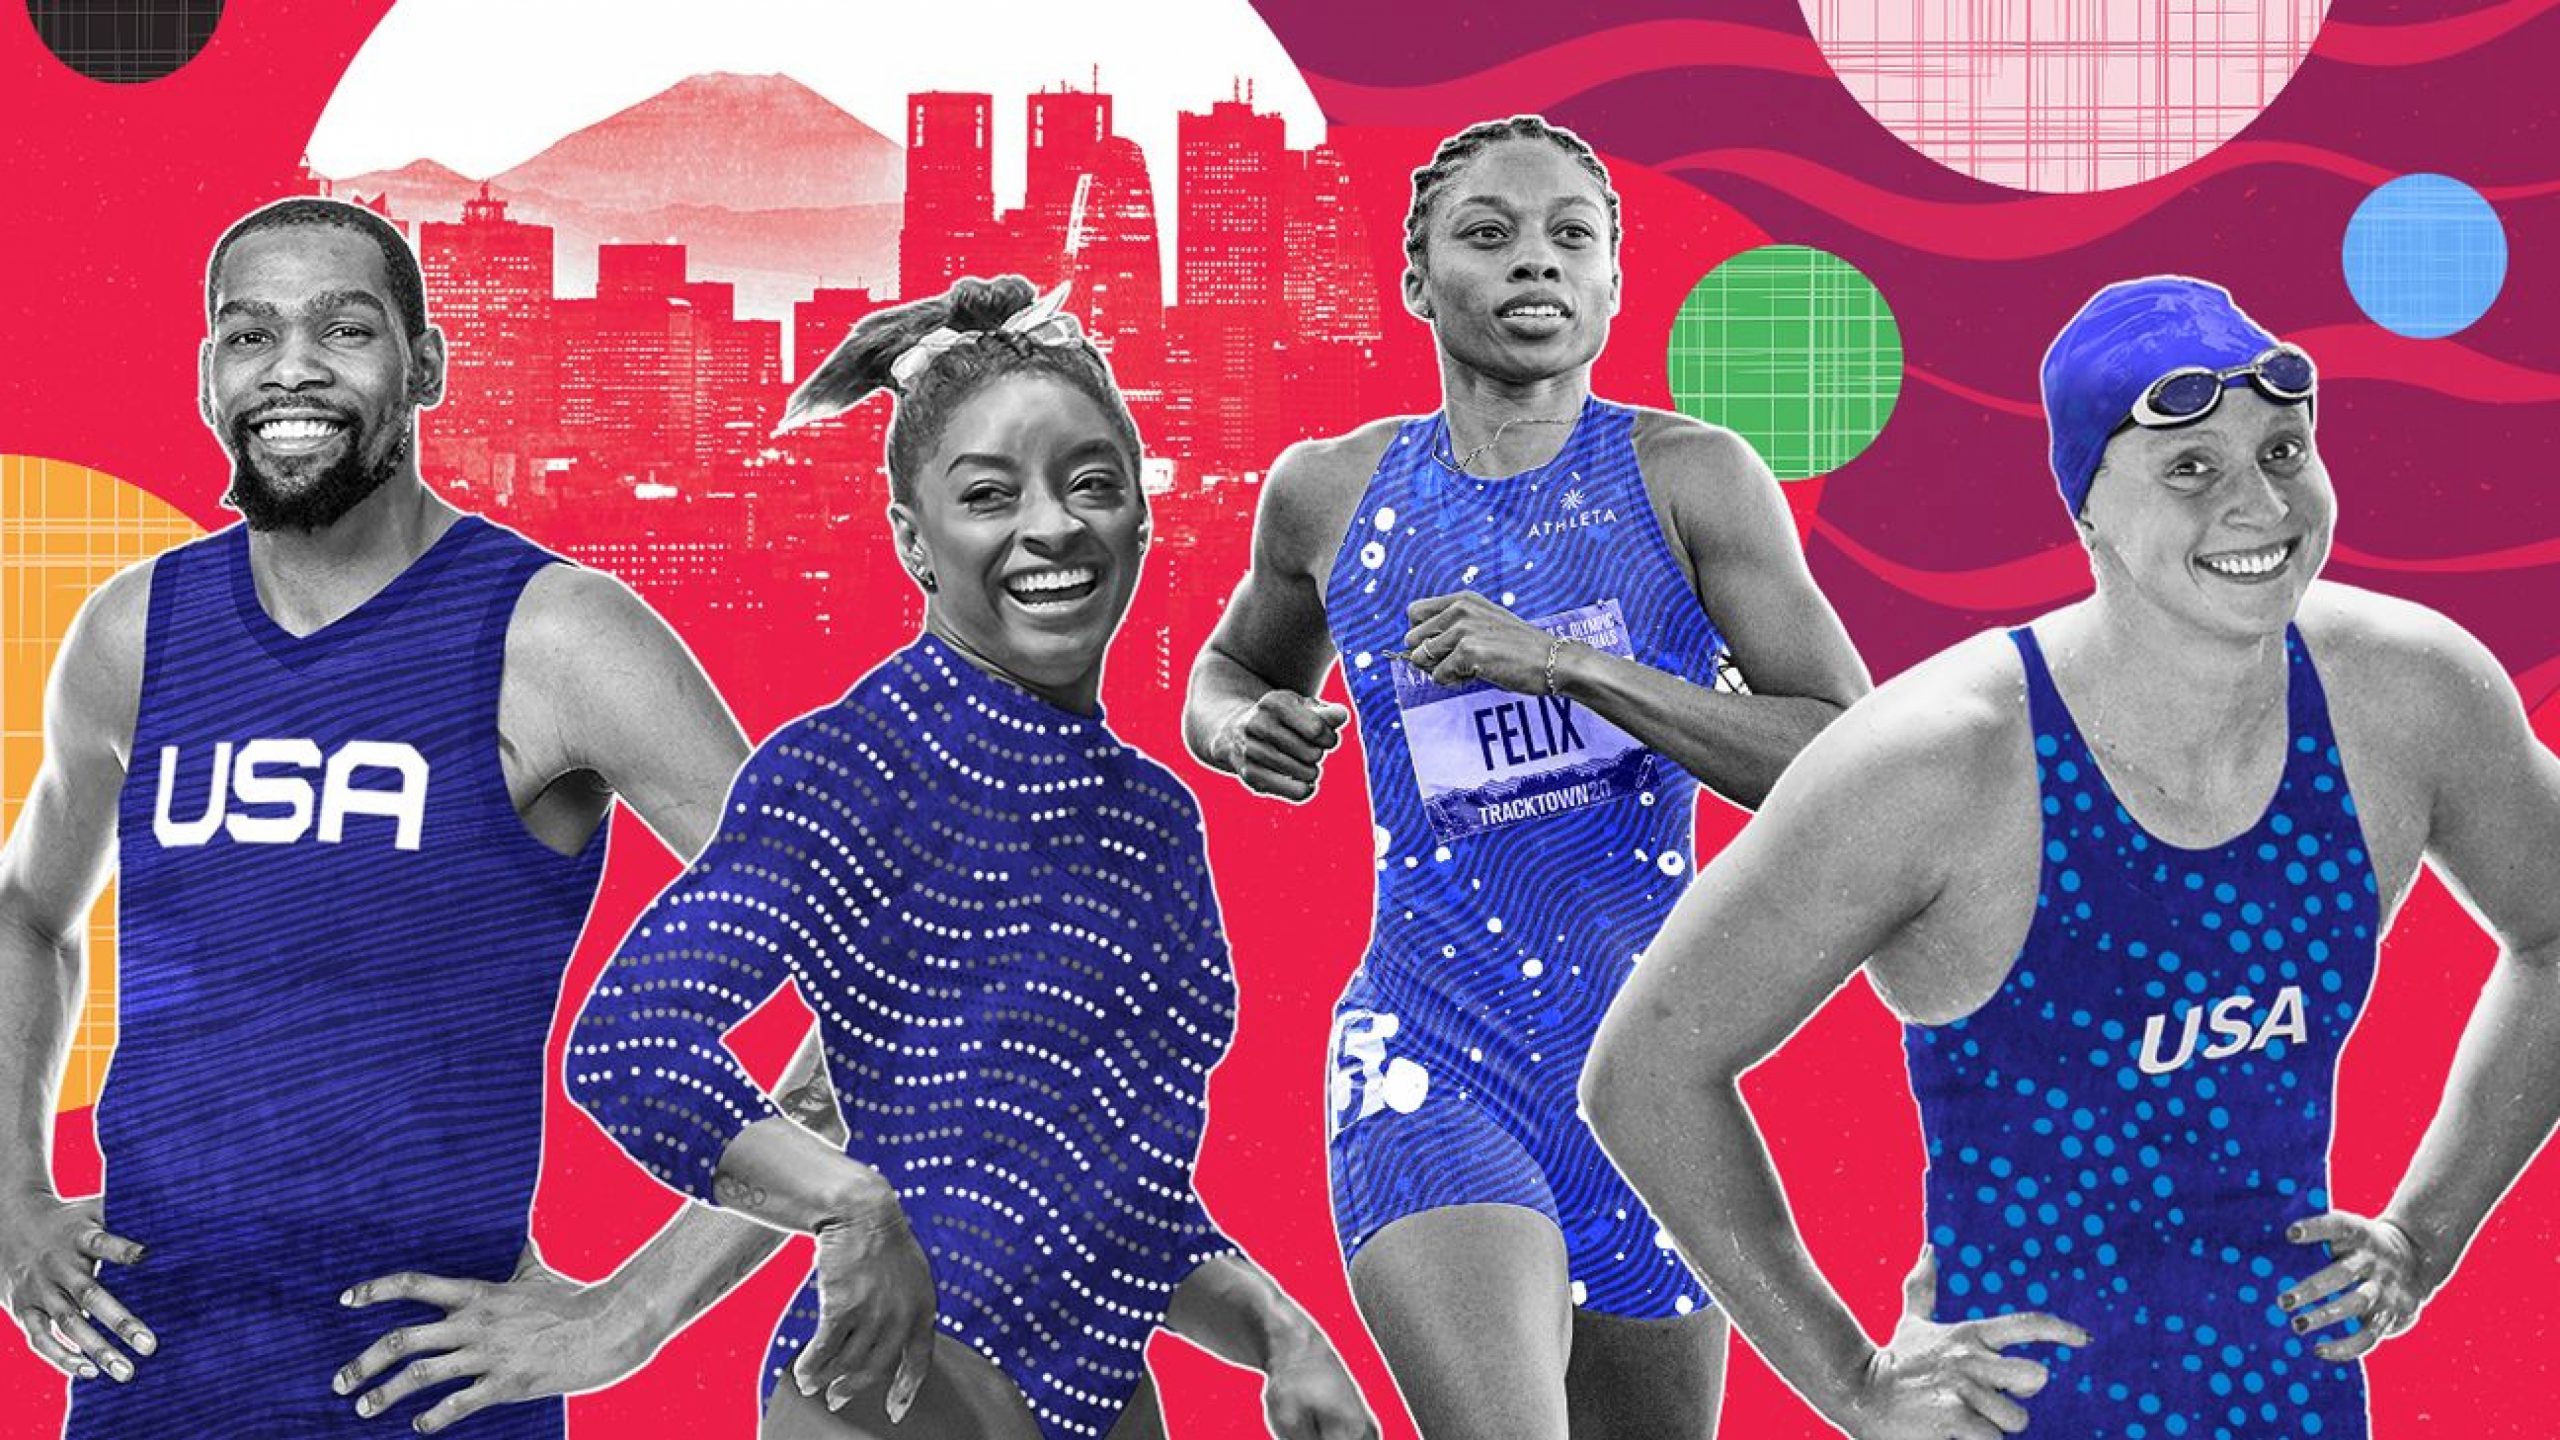 25 U.S. athletes to watch at the Olympics